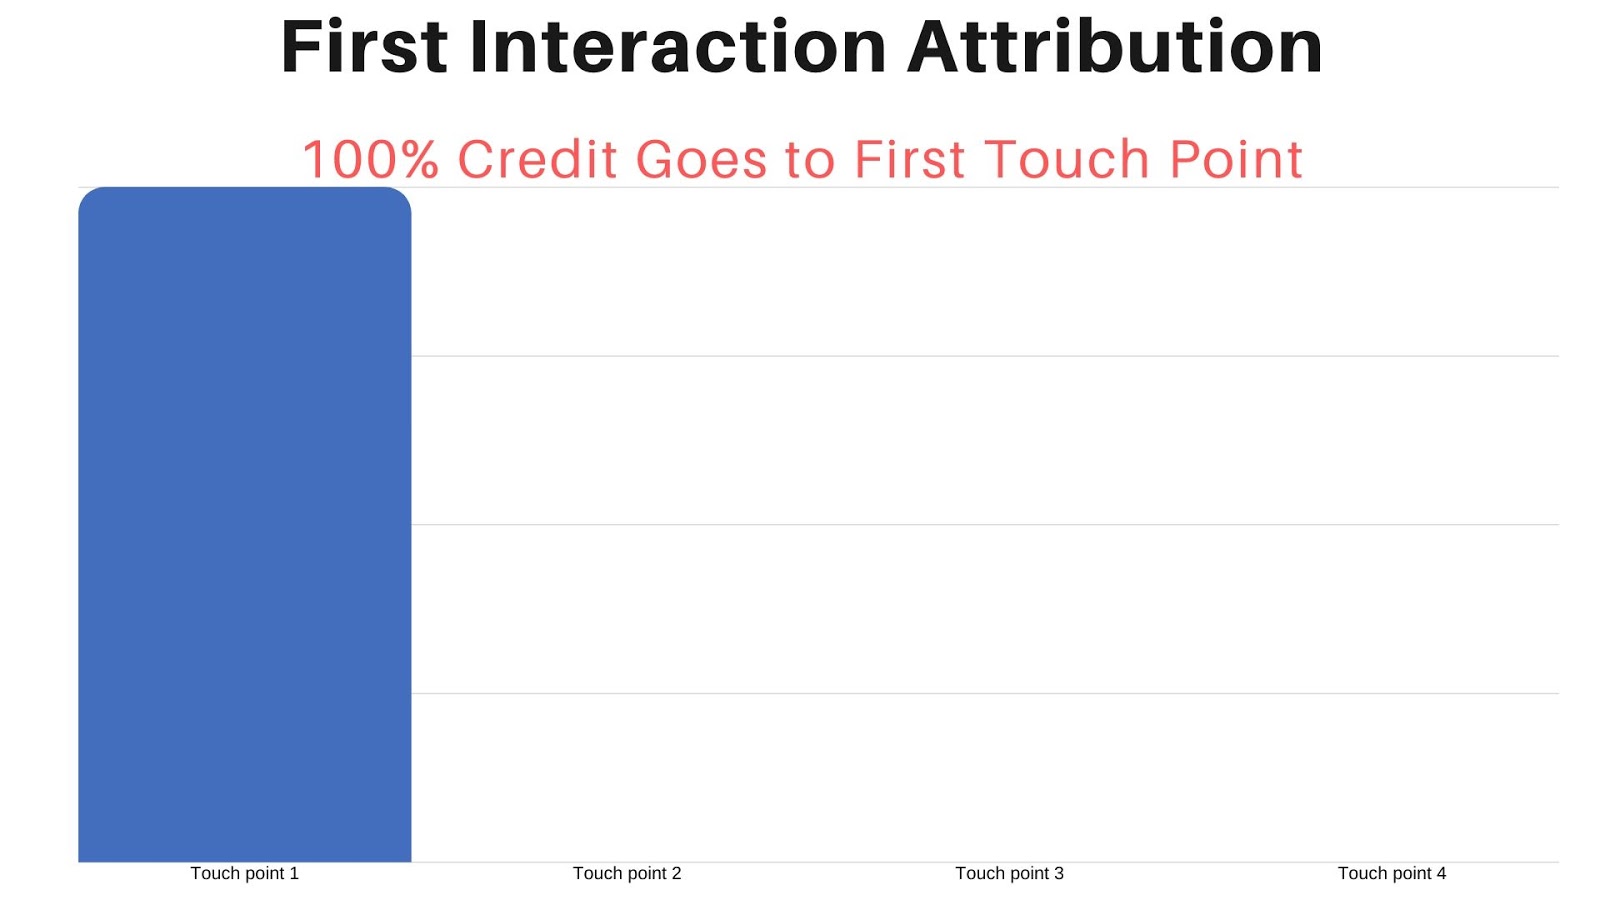 First click or interaction attribution